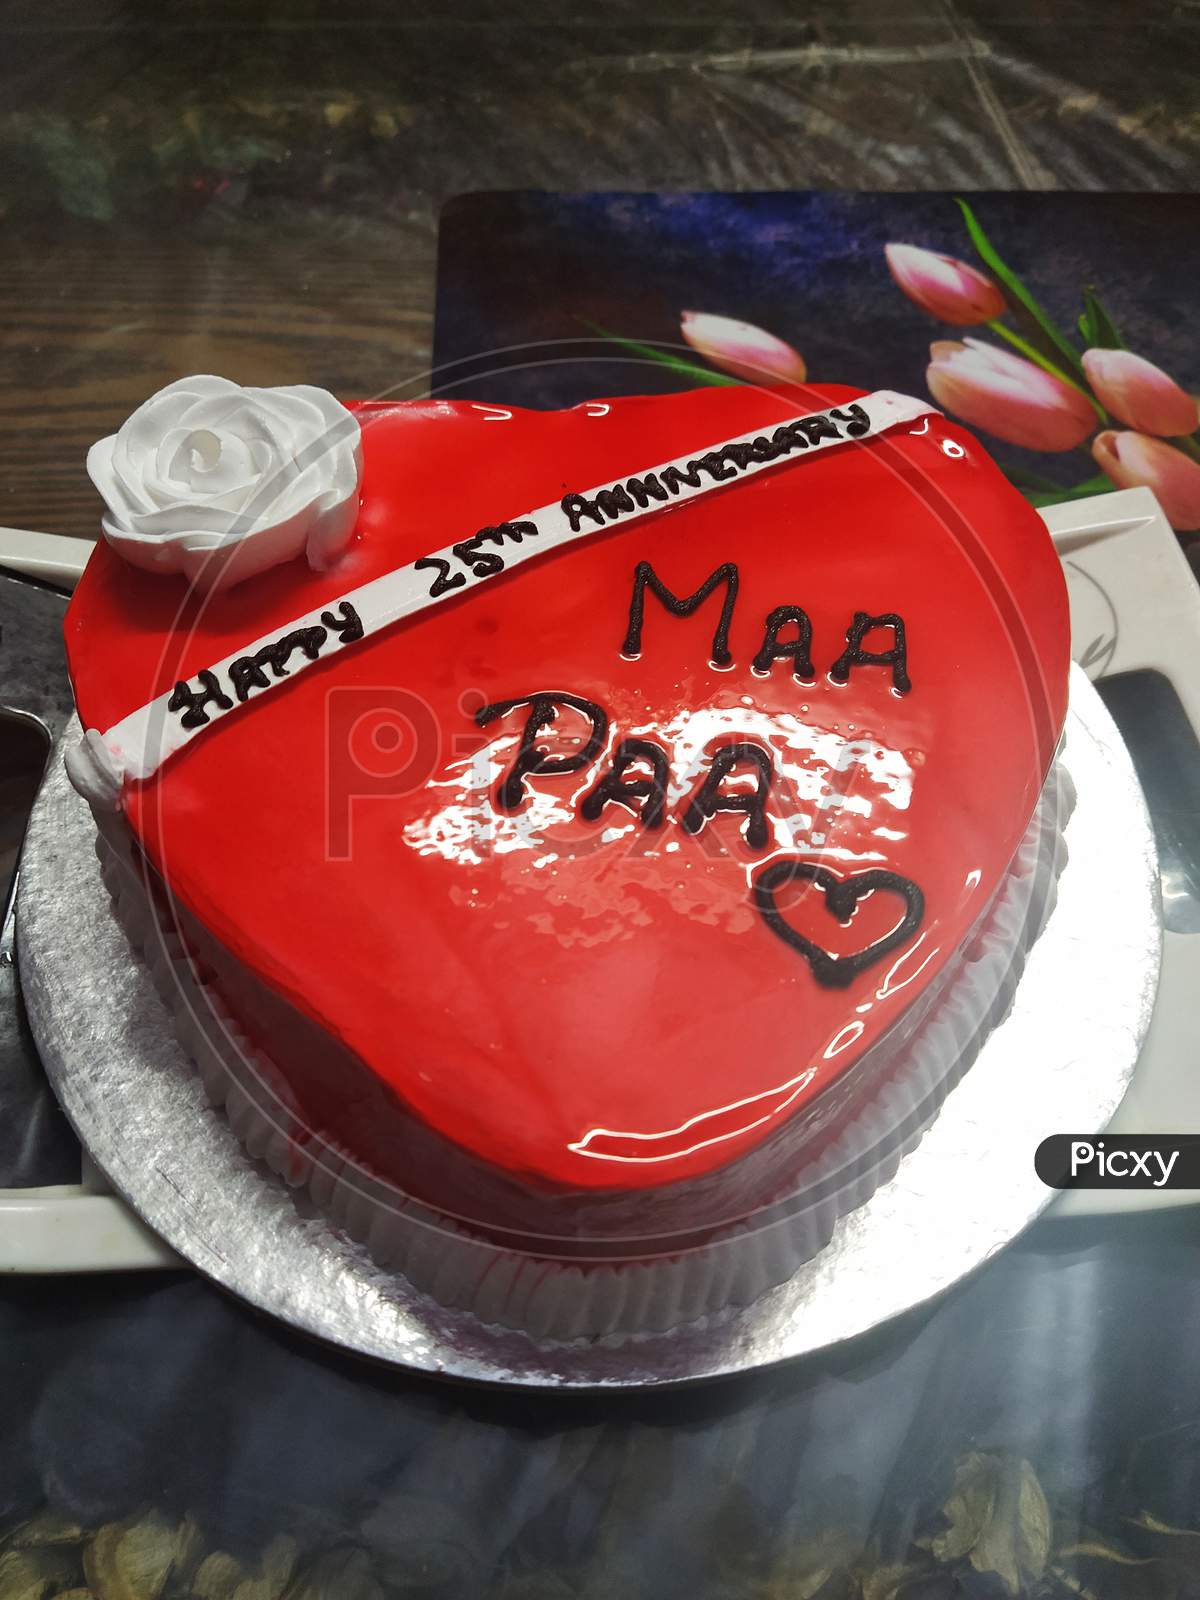 Red Velvet Cake - Birthday and Anniversary Cakes | International Cake  Delivery Shop - Flora2000 to Singapore - Flora2000